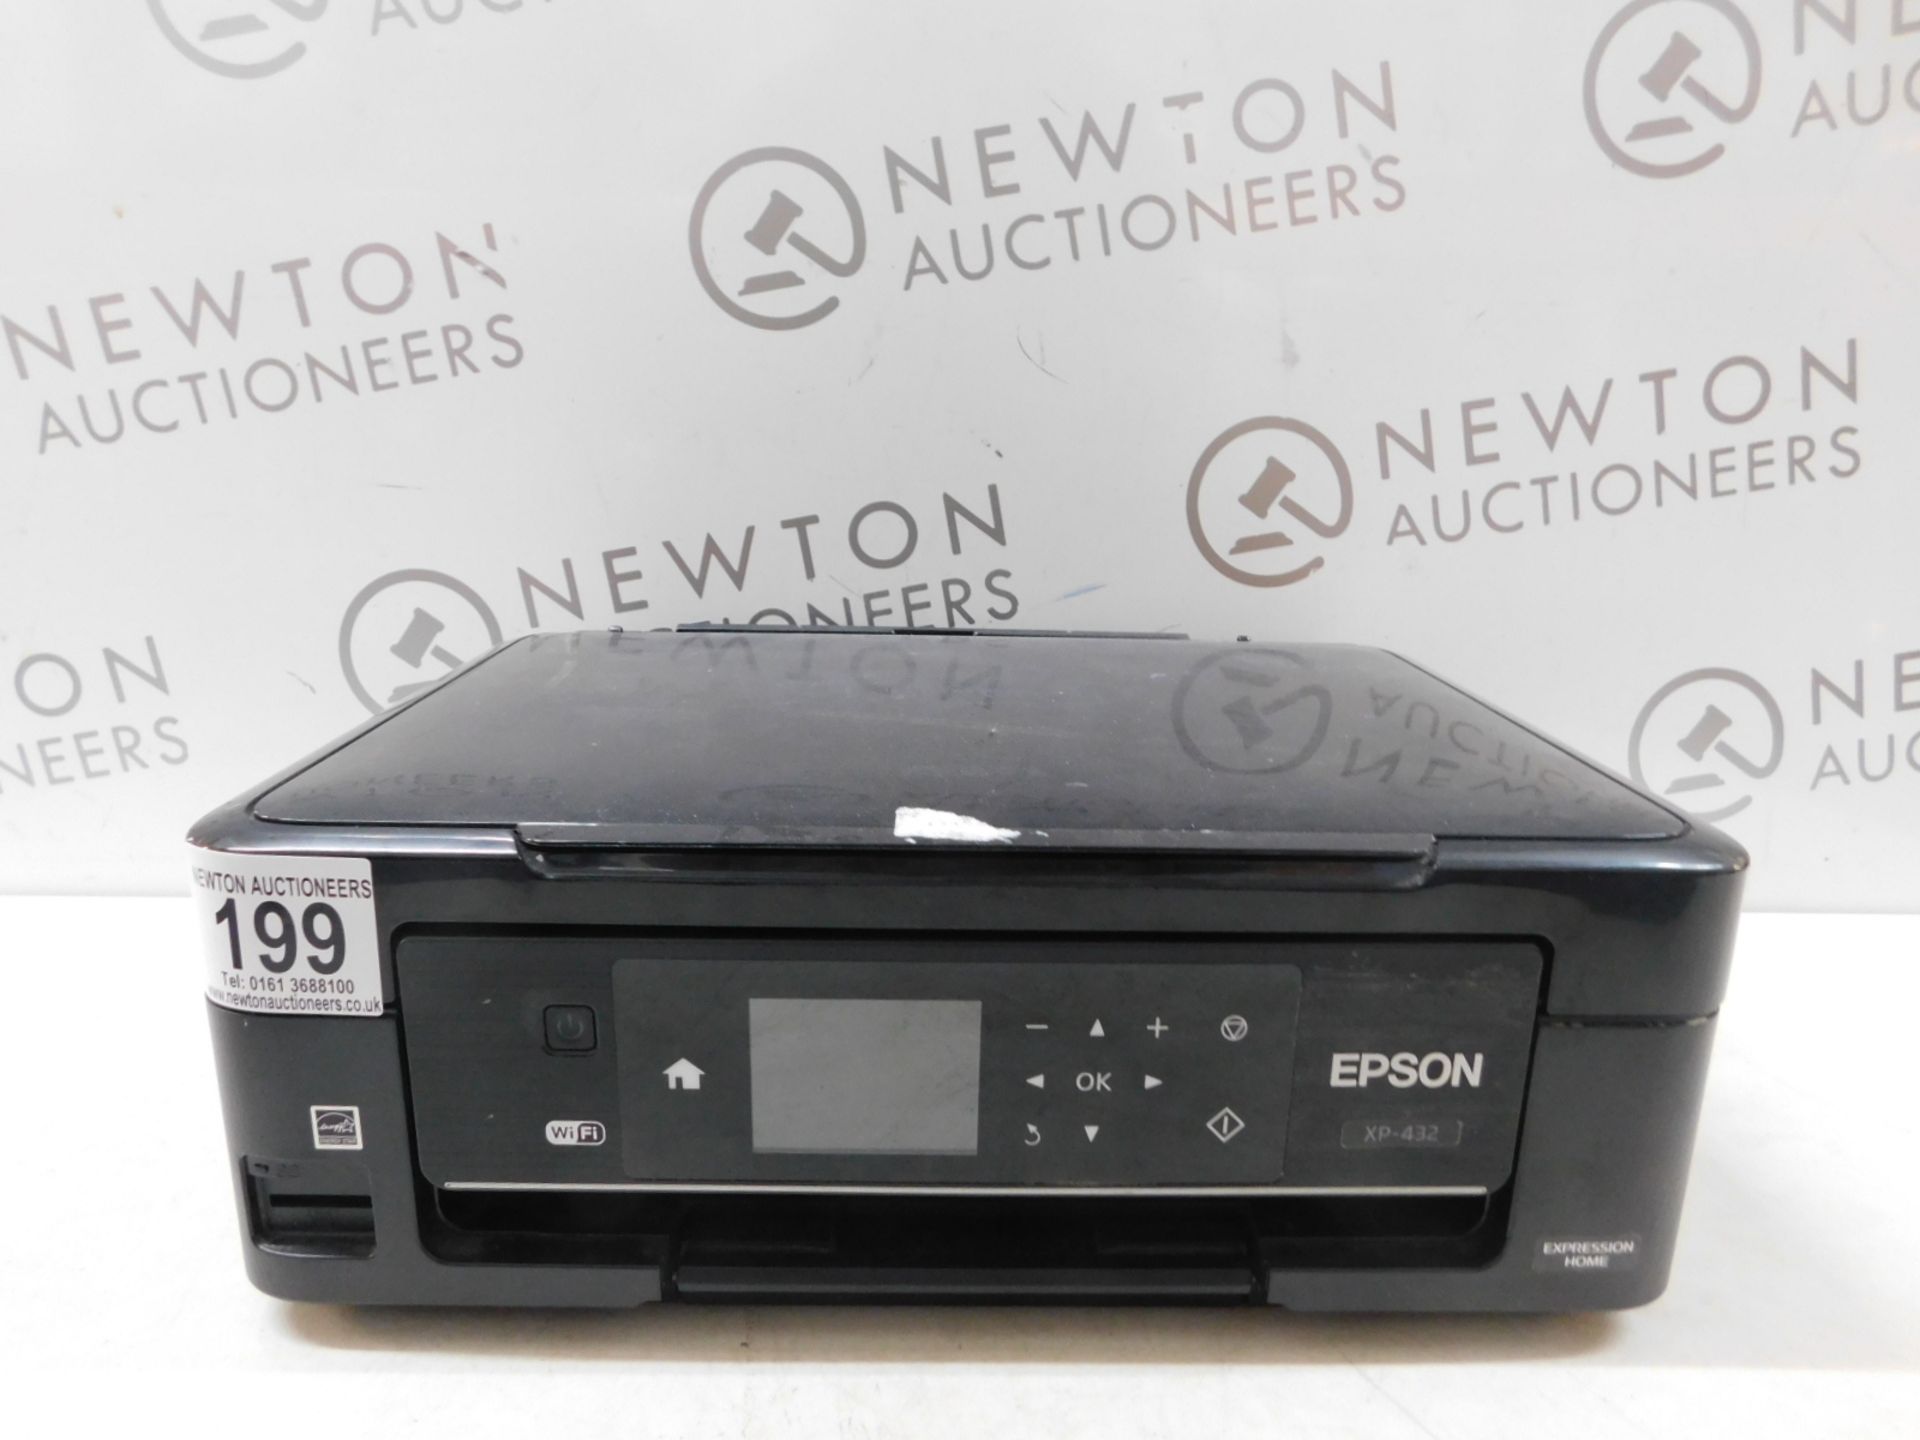 1 EPSON EXPRESSION HOME XP-432 ALL IN ONE PRINTER RRP Â£89.99